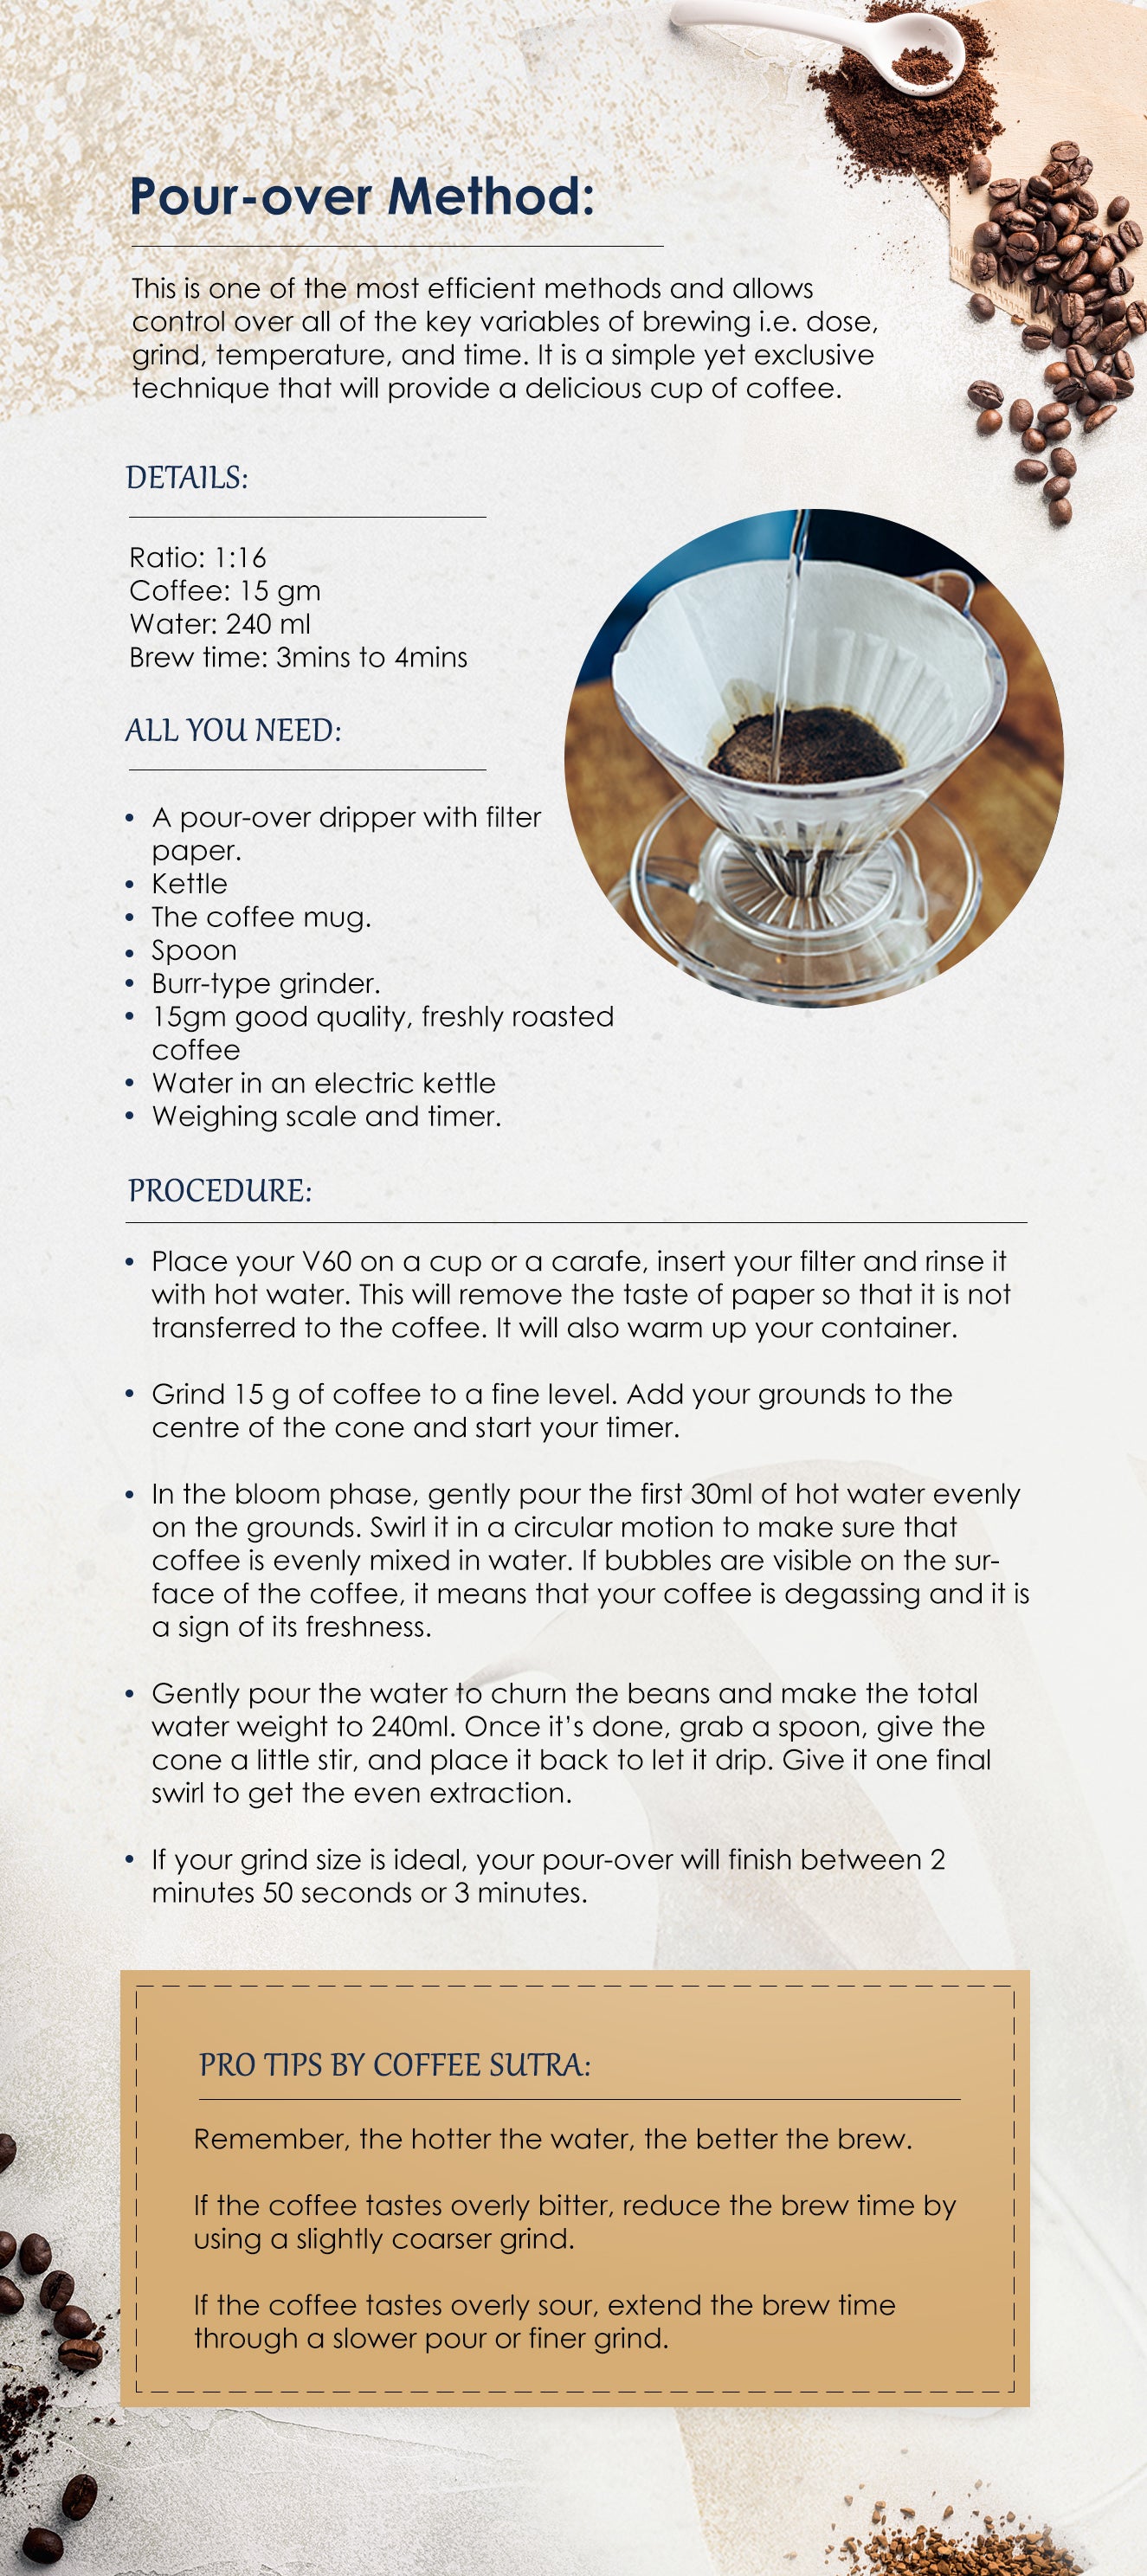 Pour-over method